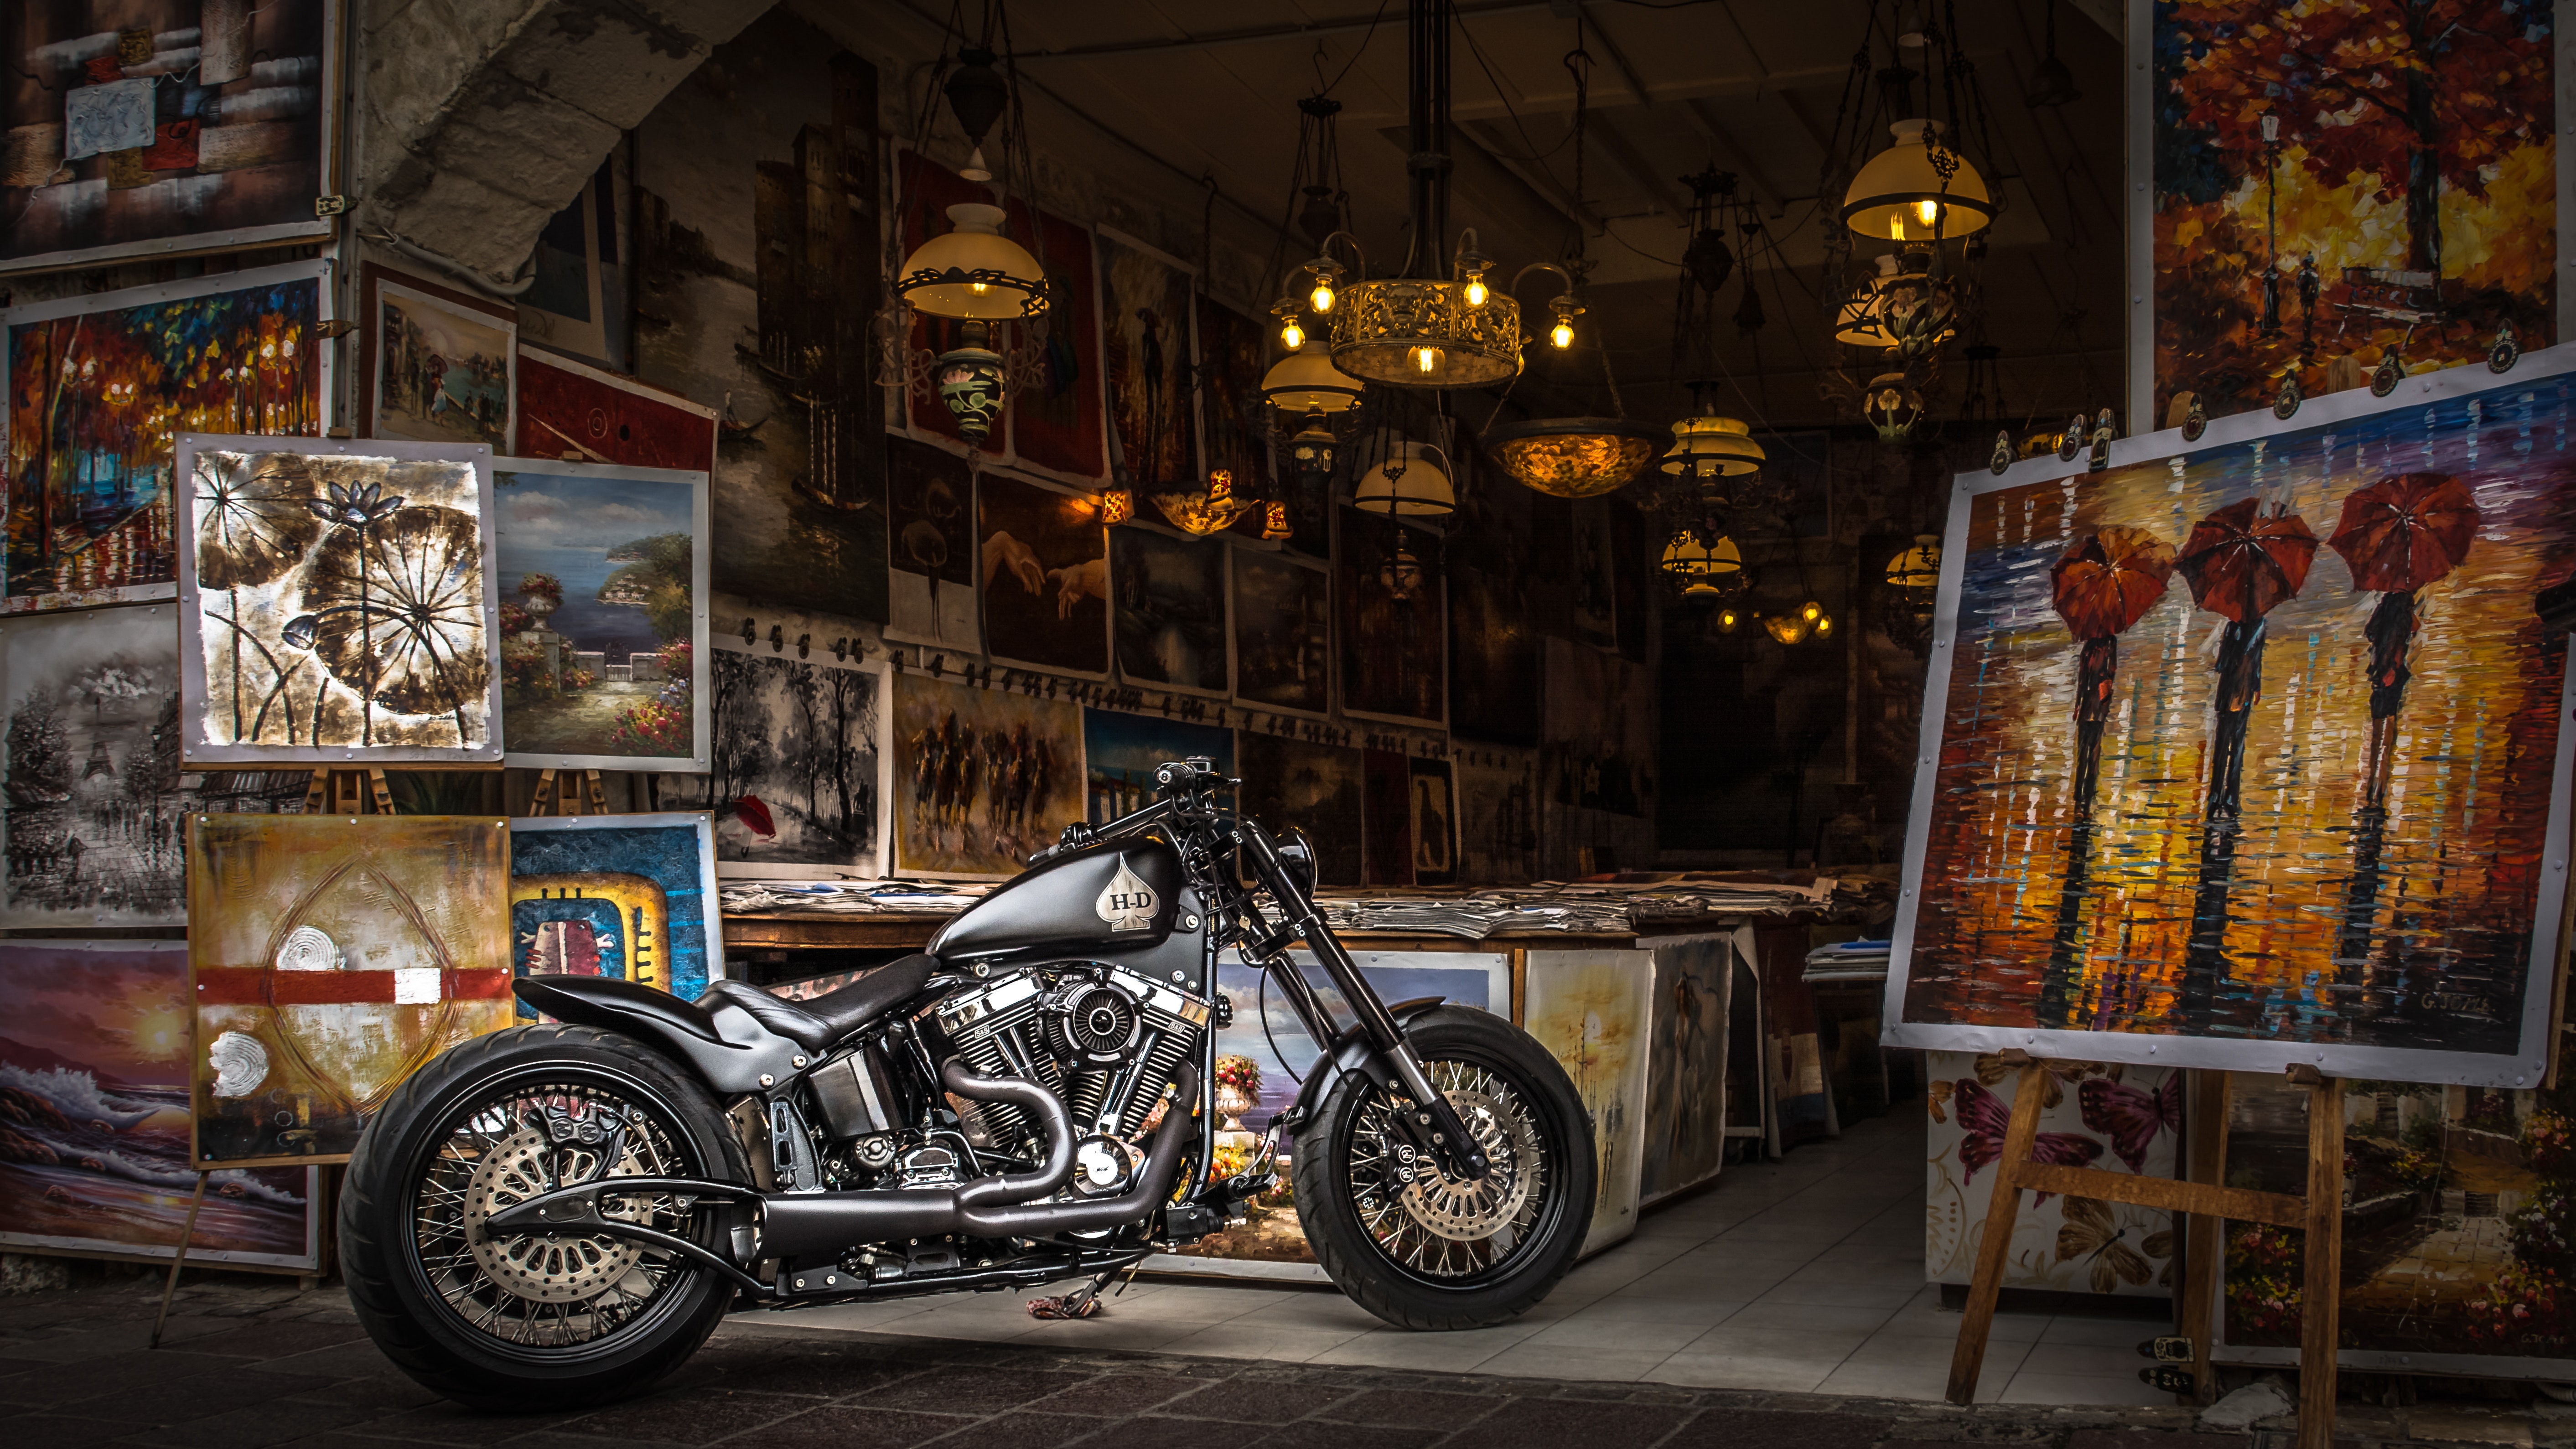 Run your small business like a motorcycle